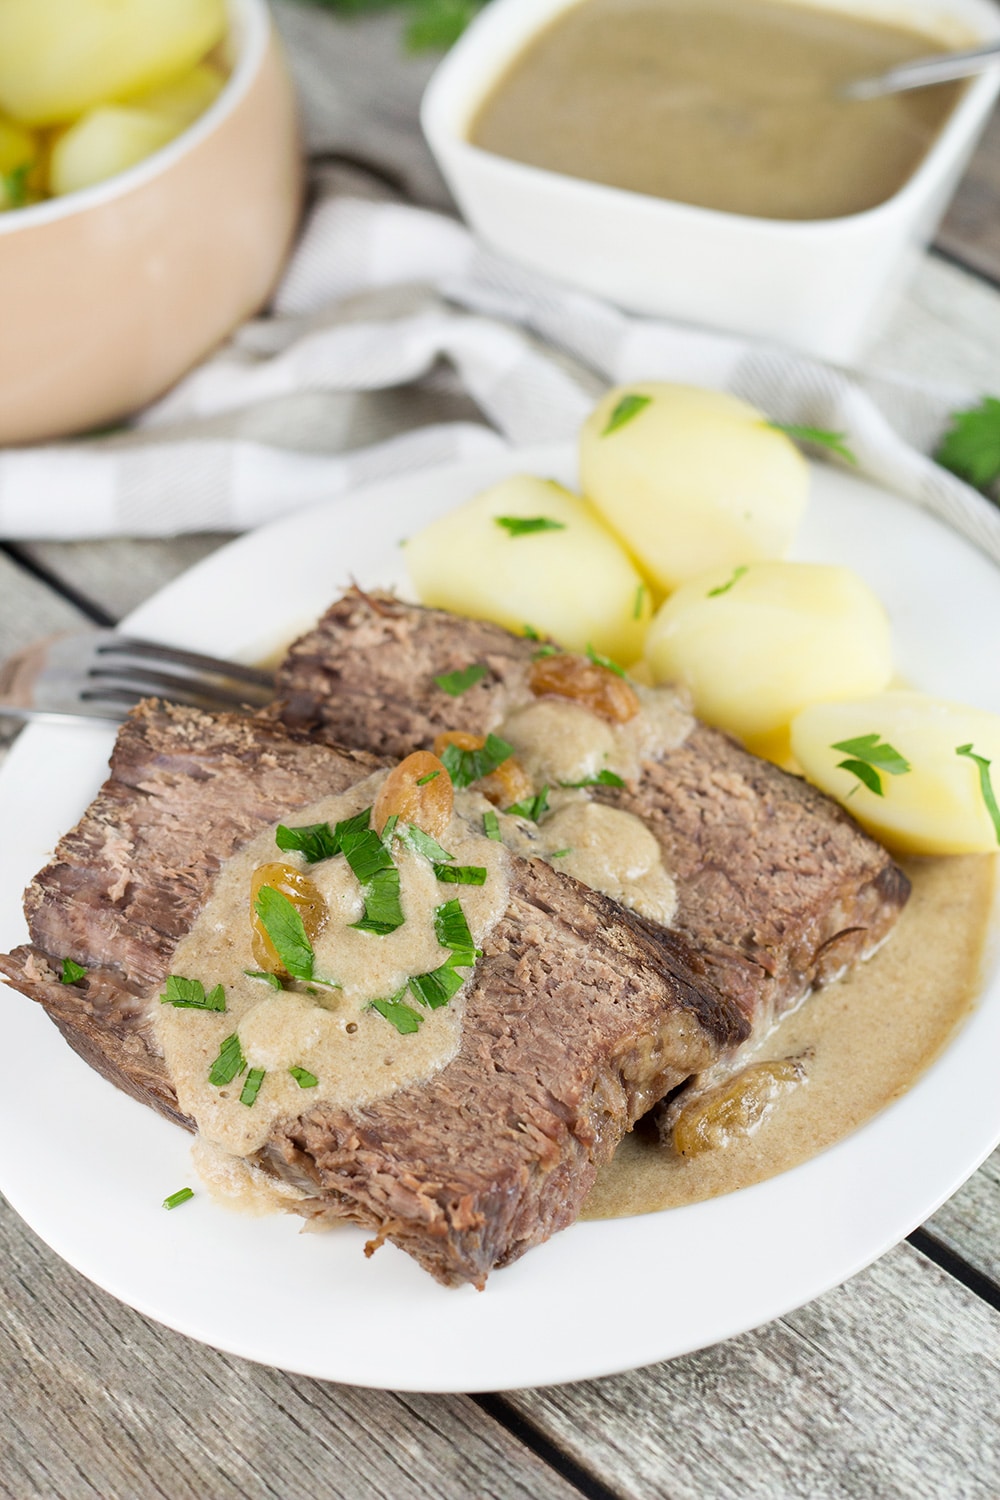 Sauerbraten is a signature German dish often served on Christmas. It's the fork-tender pot roast drowned in a fantastic sweet & sour gravy! | cookingtheglobe.com